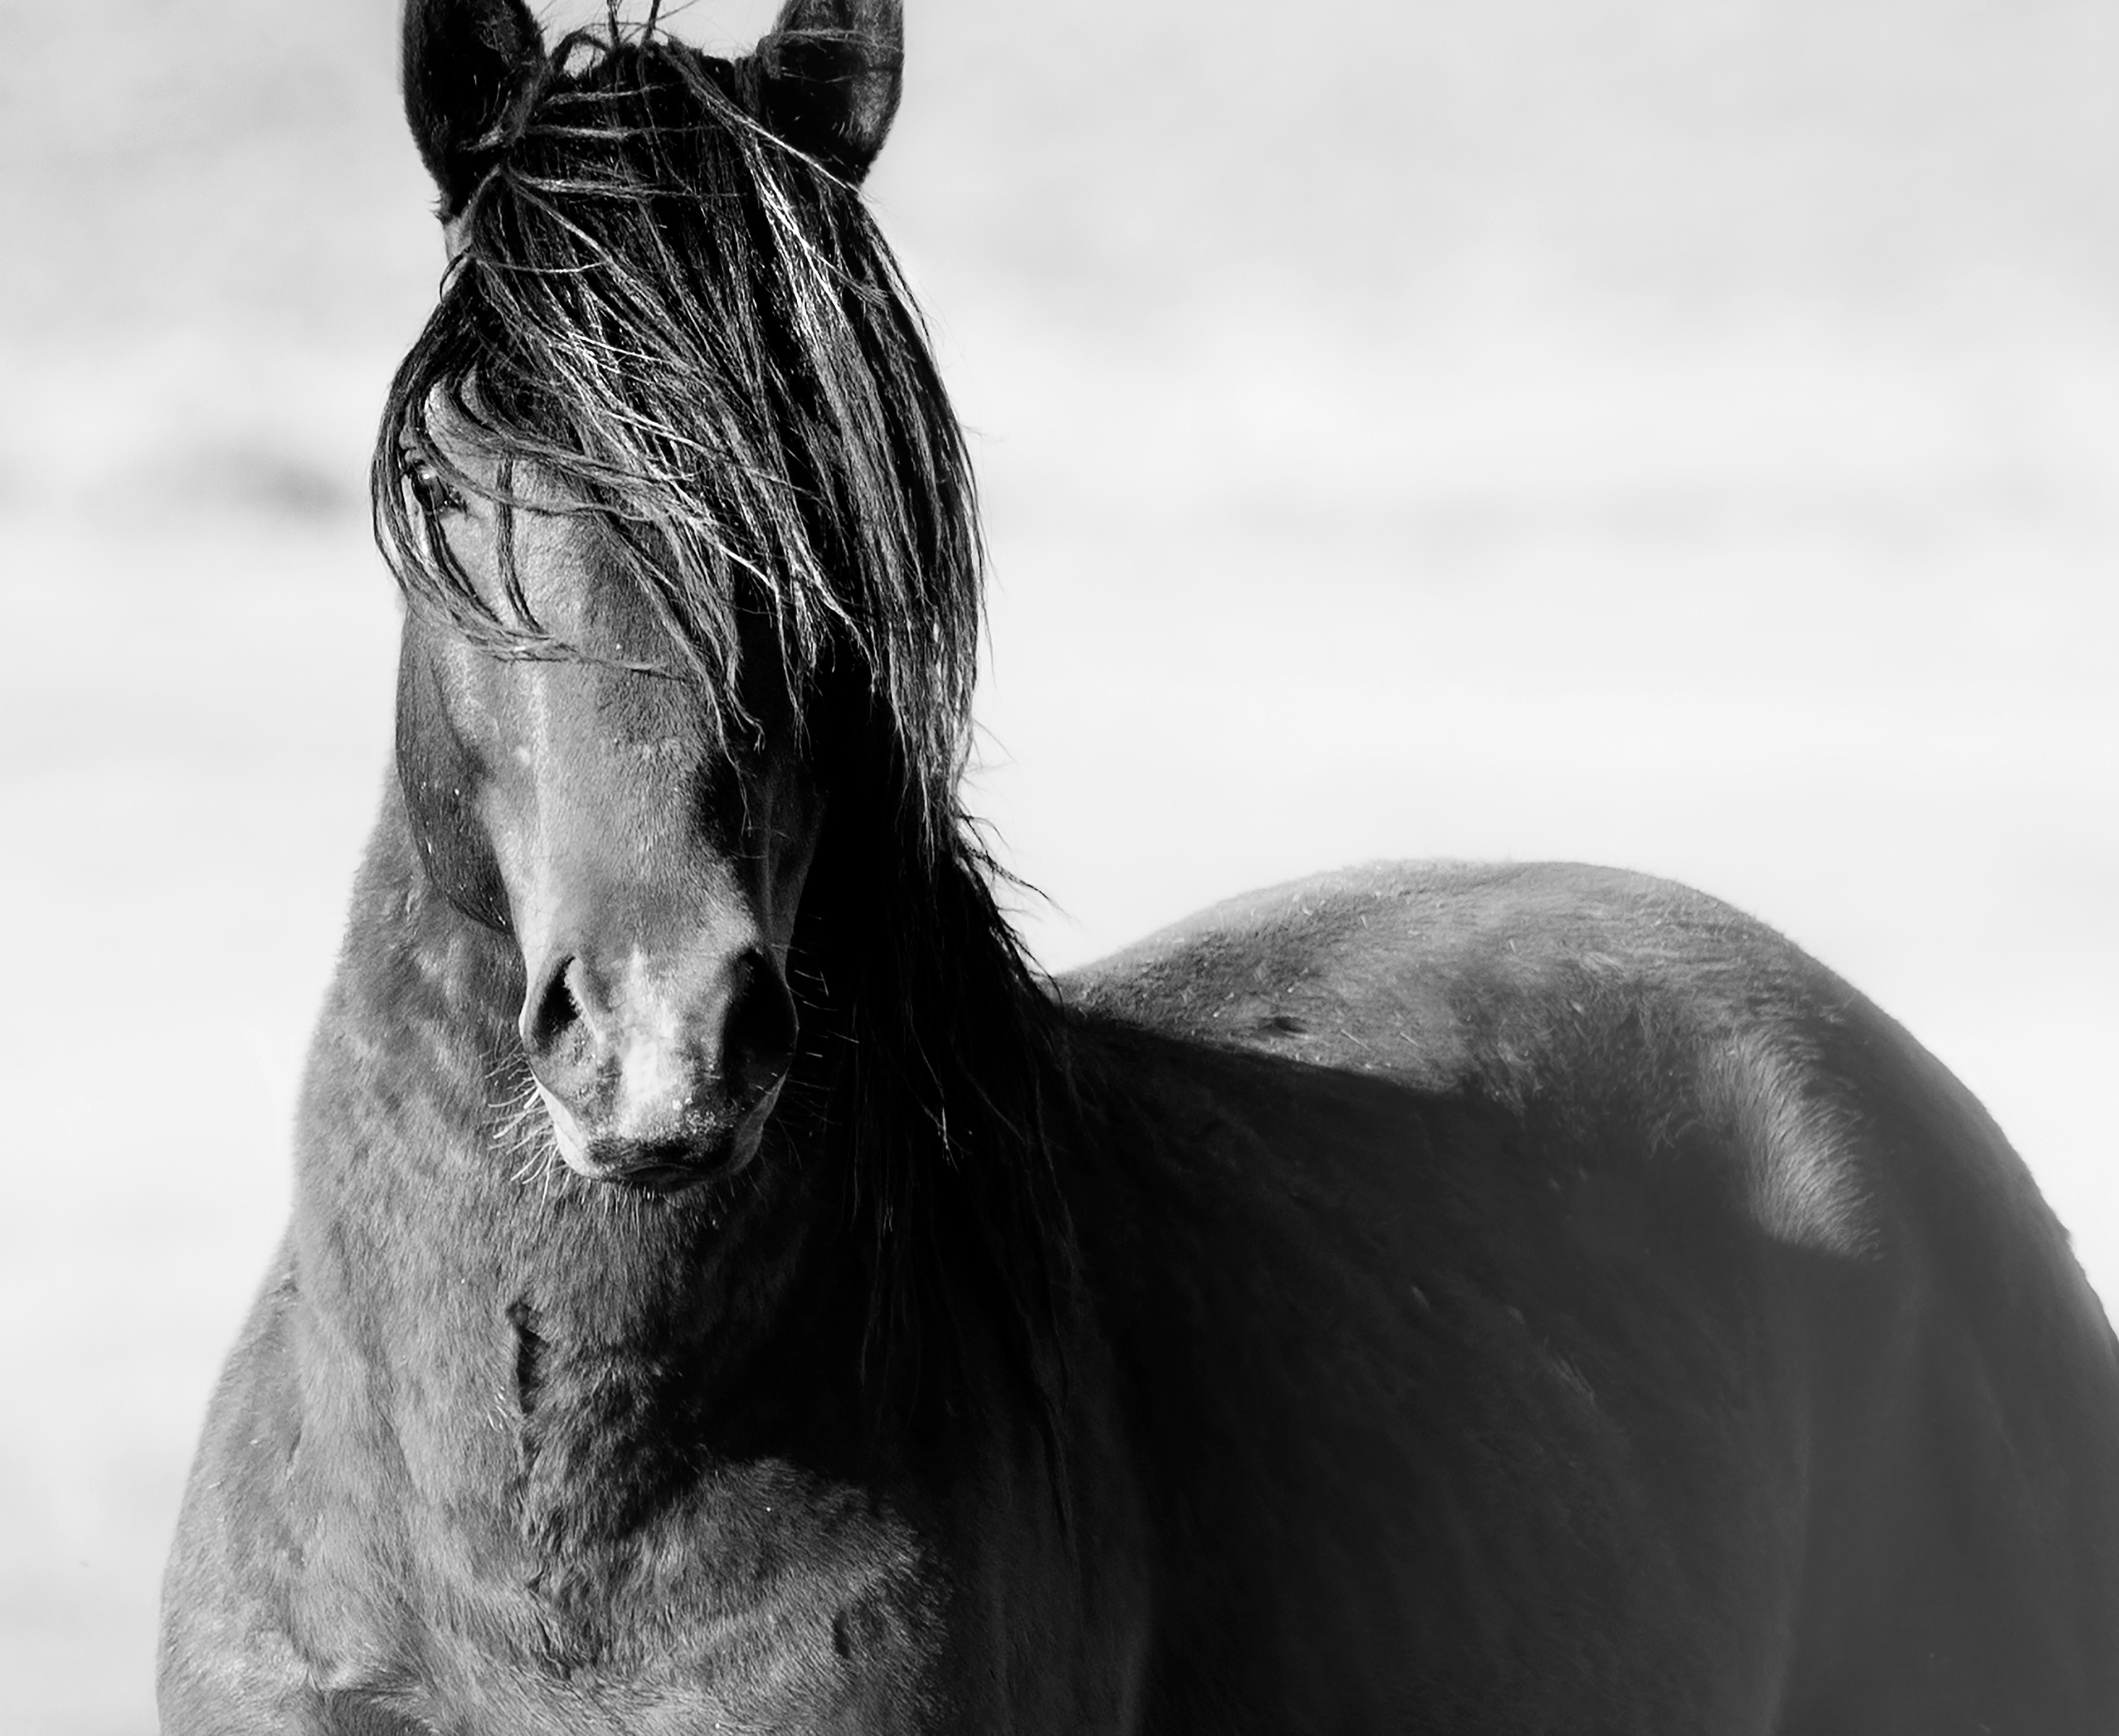 This is a contemporary black and white photograph of a Wild Mustang by Shane Russeck. 
"They represent the ultimate expression of American freedom"
40" x 60"
Edition of 10
Printed on archival paper using archival inks
Signed and numbered
Framing